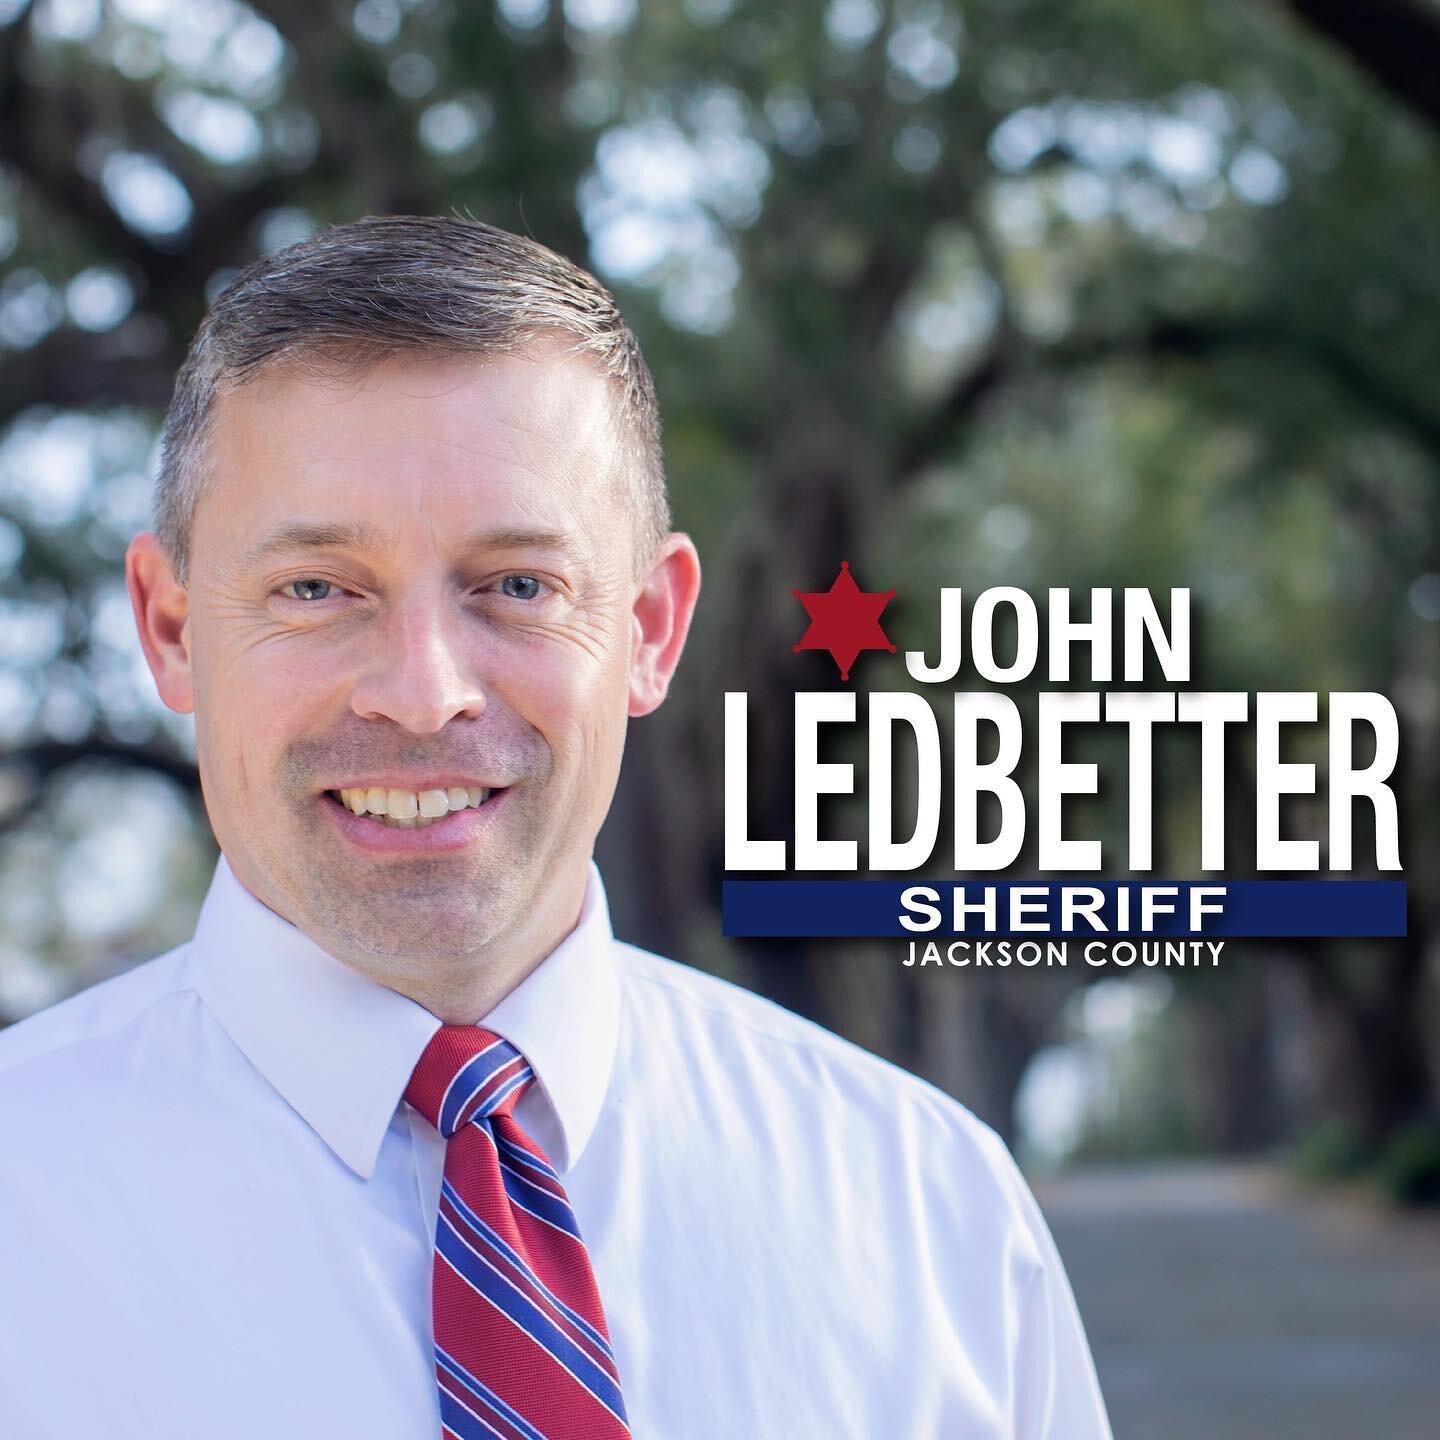 VOTE TUESDAY 8/8 for integrity, service, and experience. Sheriff John Ledbetter&rsquo;s priorities are making Jackson County an even better and safer place to live, work and visit; building greater connections and trust throughout the community; and 